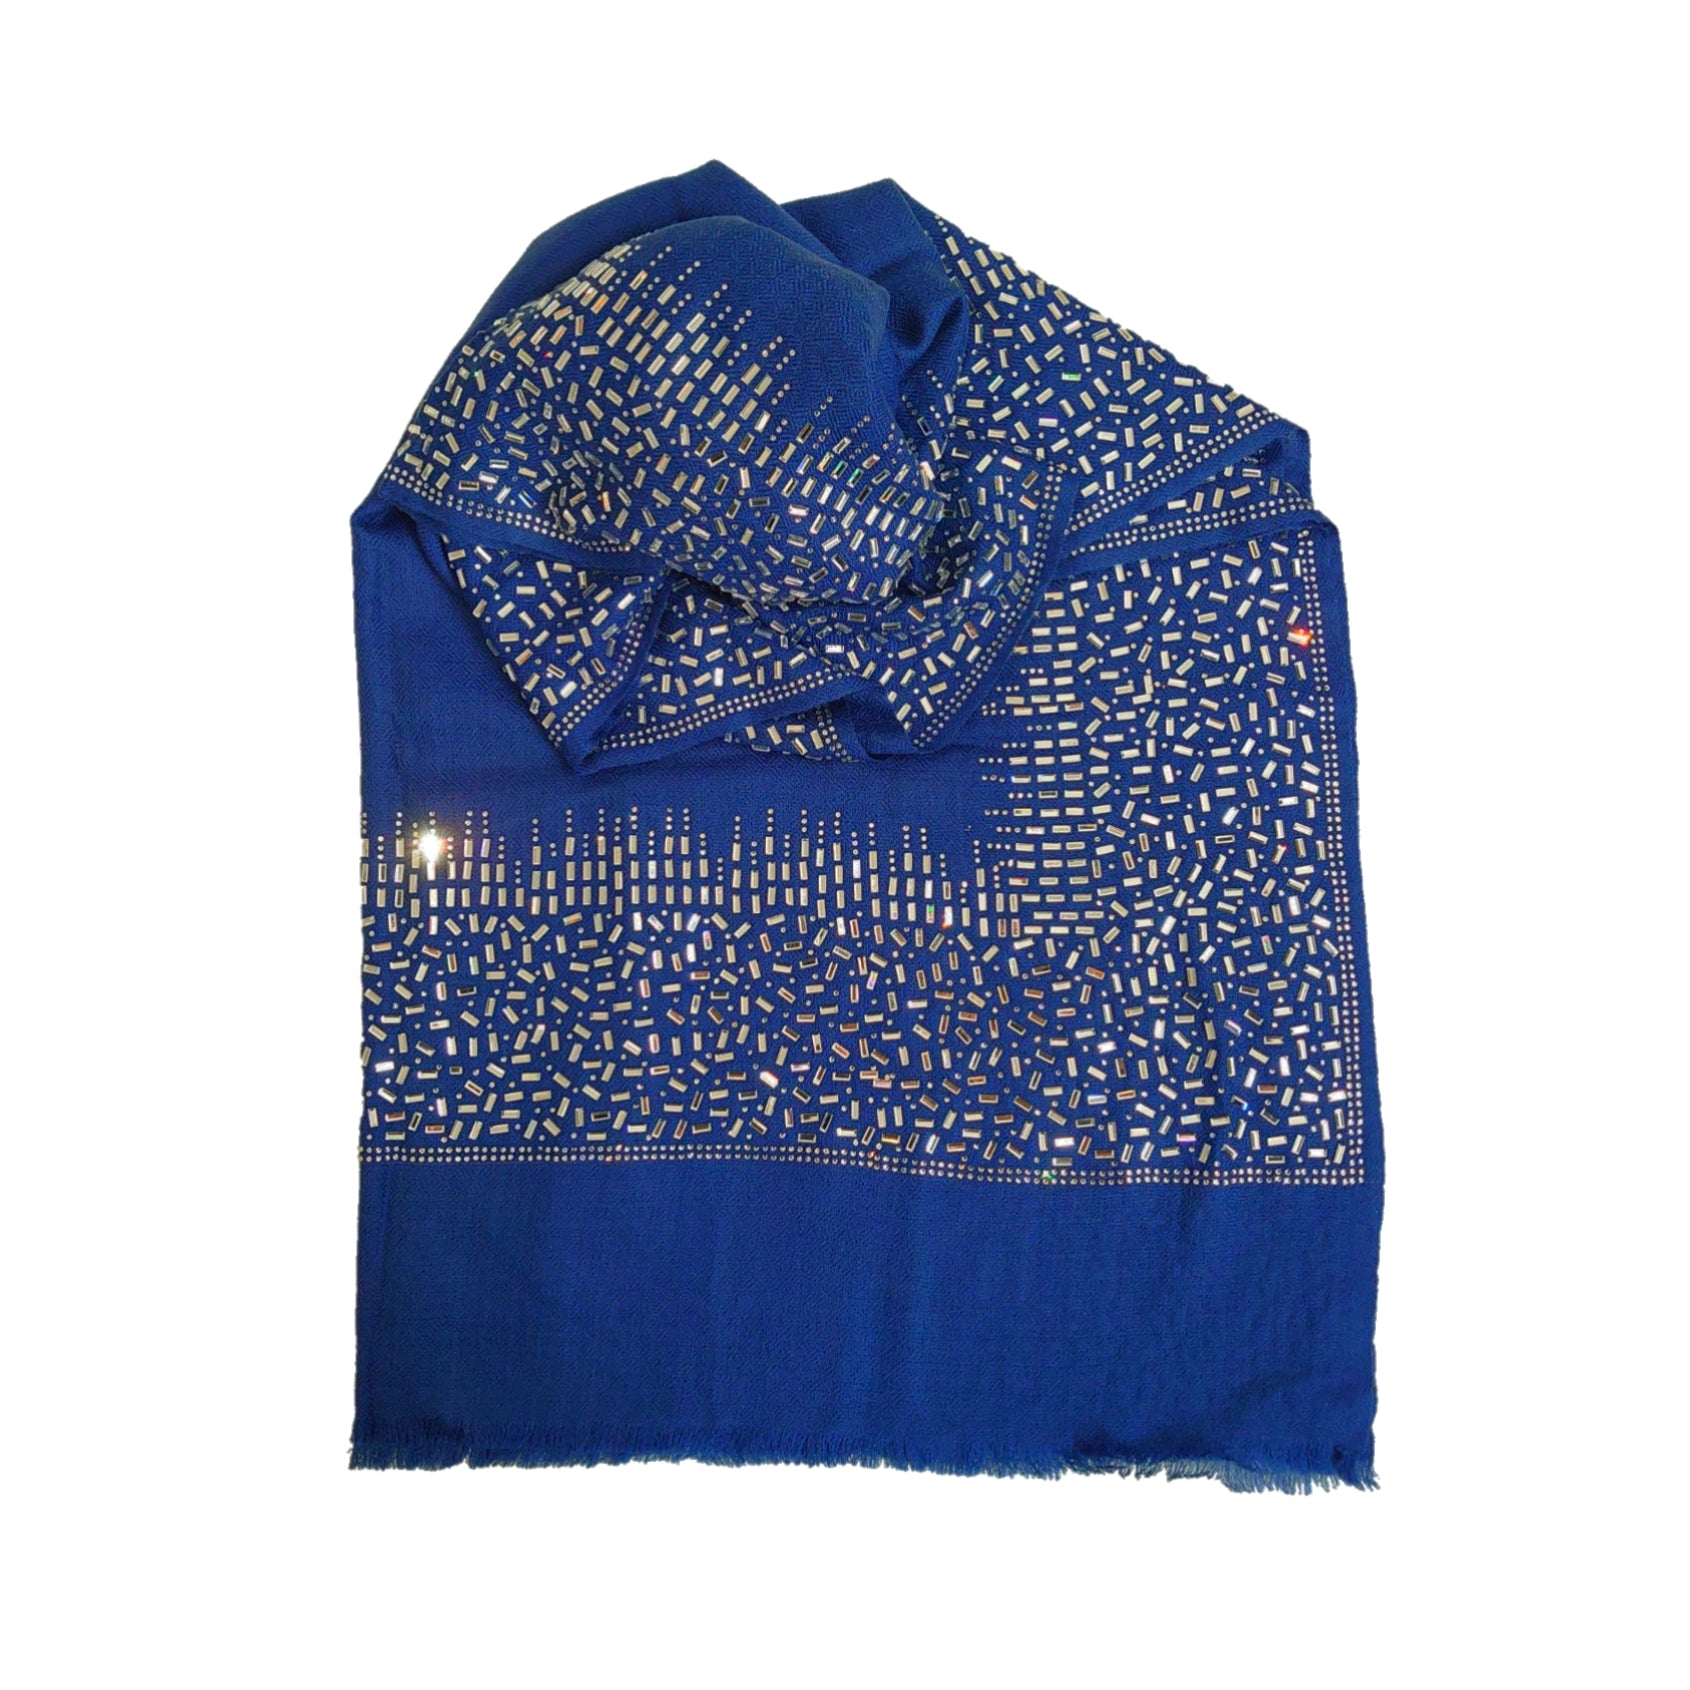 Luxury Pashmina Stole With Crystals